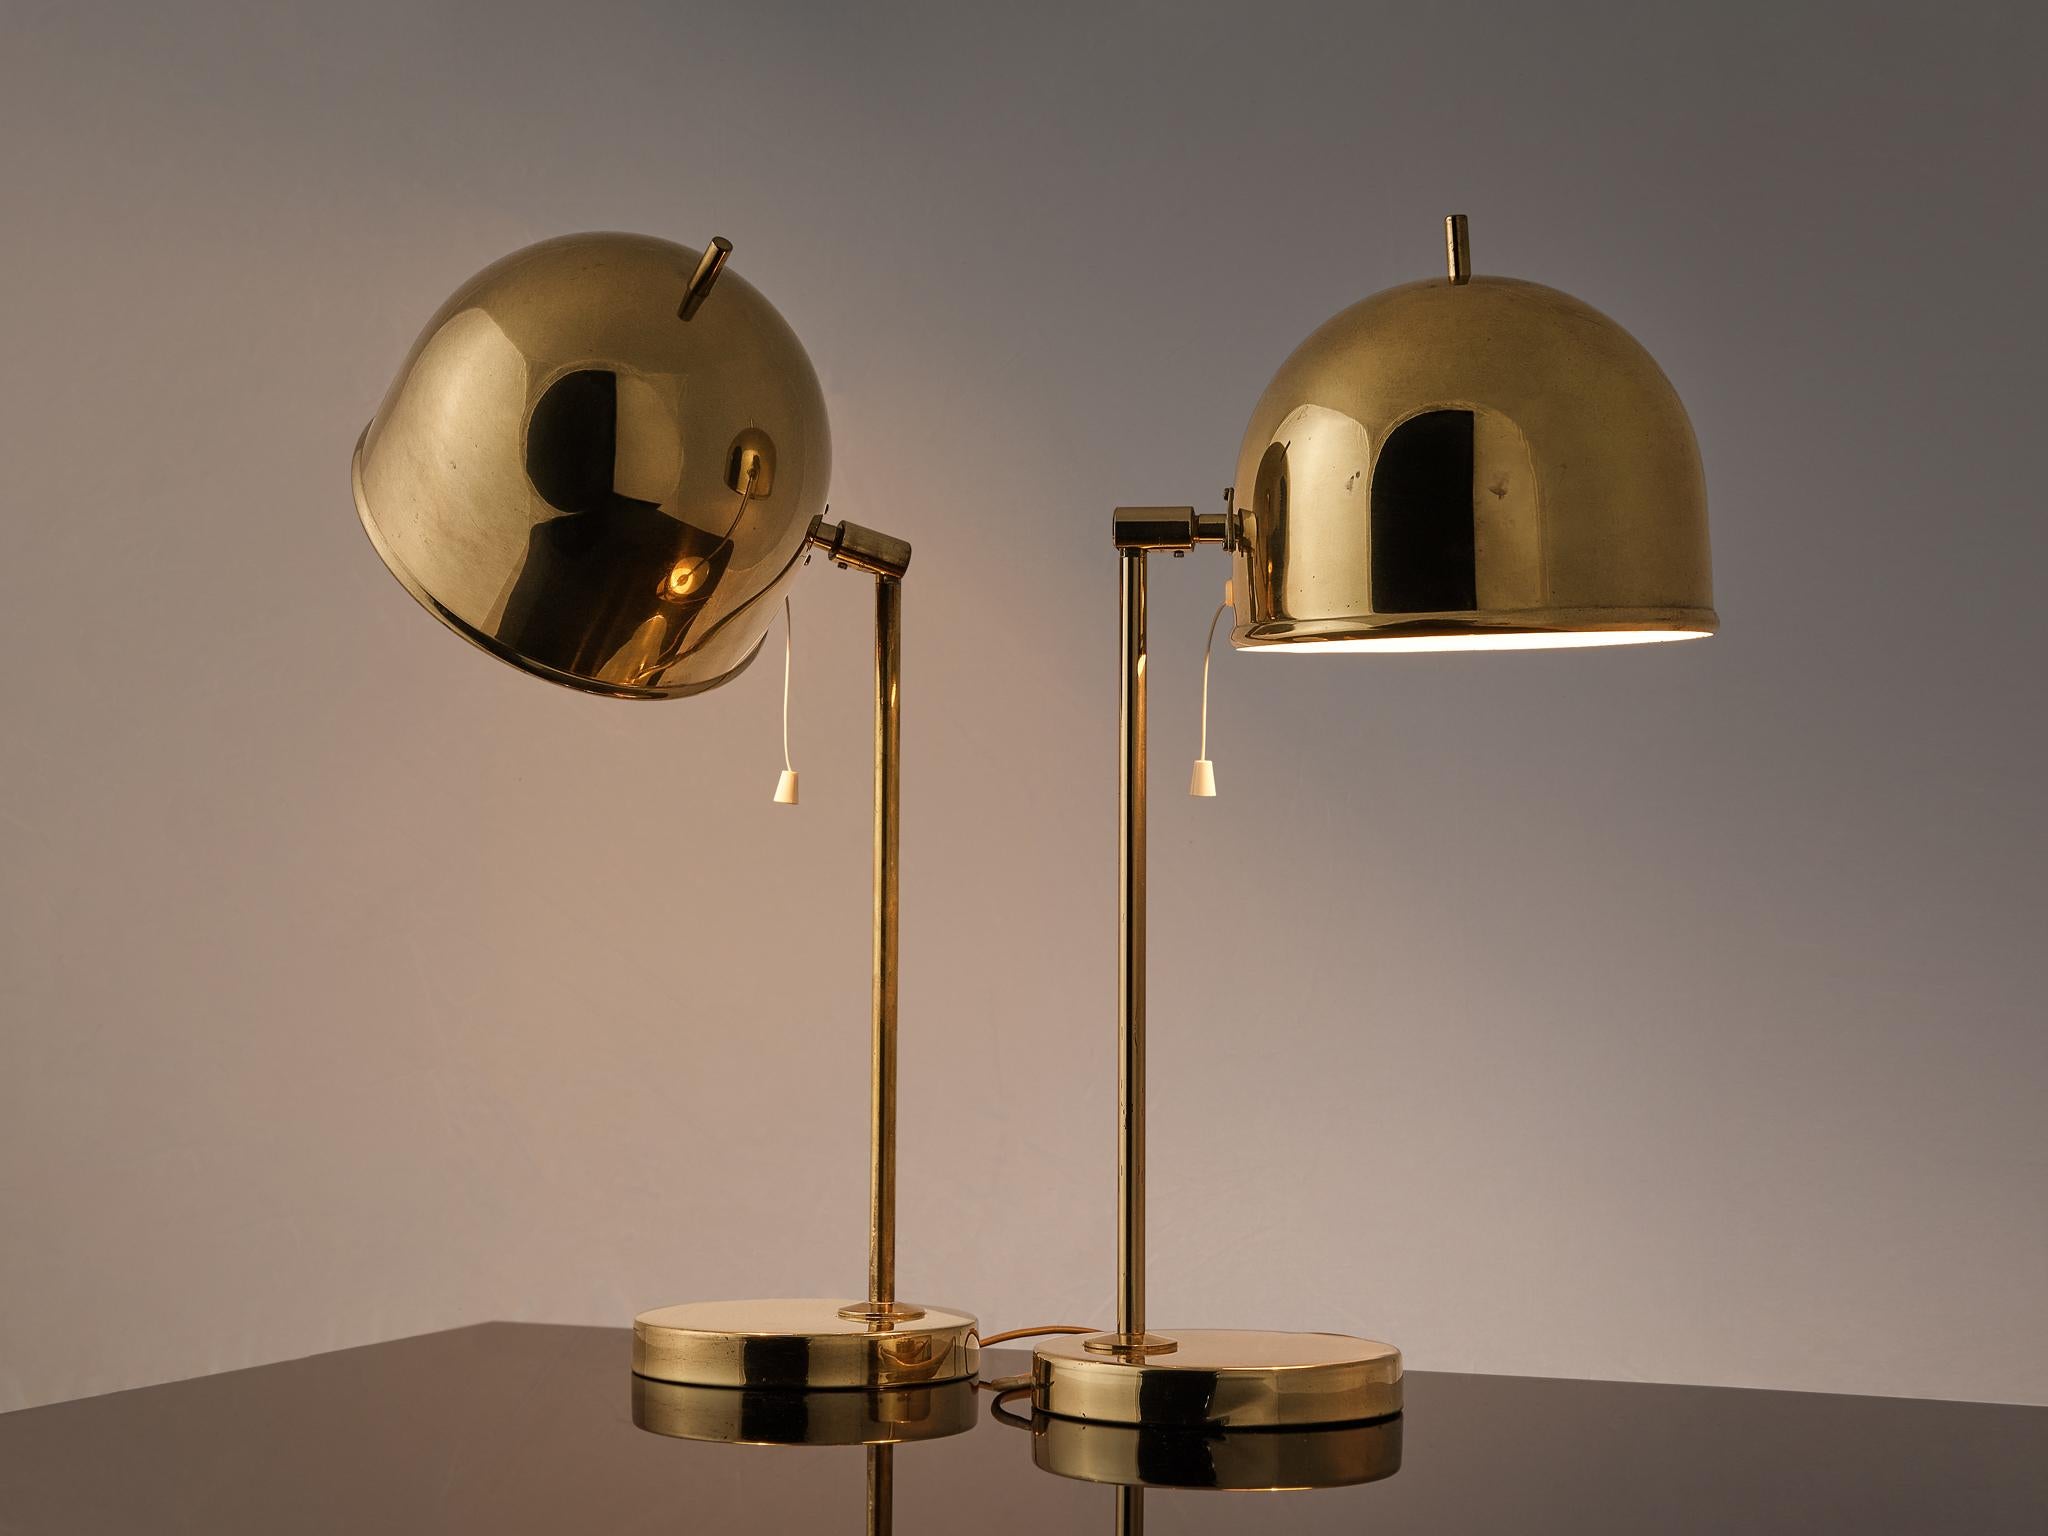 Bergboms, pair of table lamps, model B-075, brass, plastic, Sweden, 1960s.

This delicate table lamp of Swedish origin embodies a splendid construction of round shapes and delicate lines. The shade is well-executed showing a round-shaped structure.